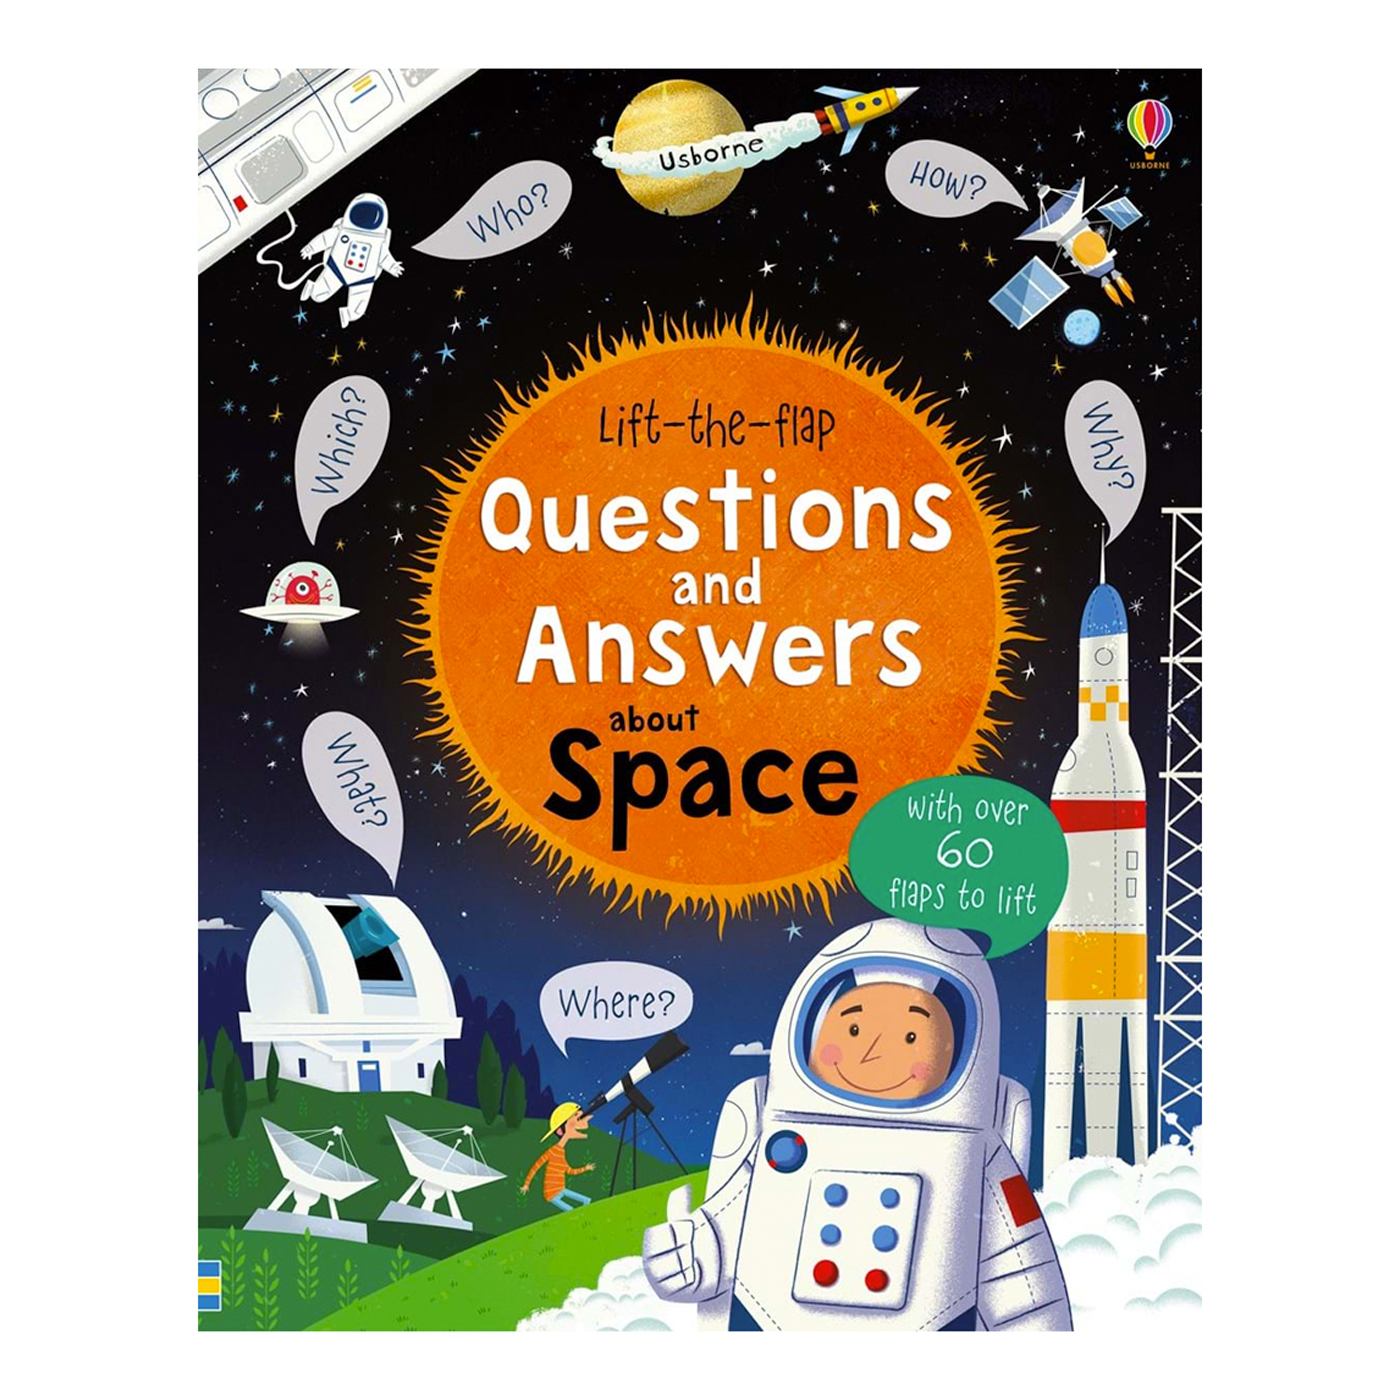  Questions and Answers: The Space